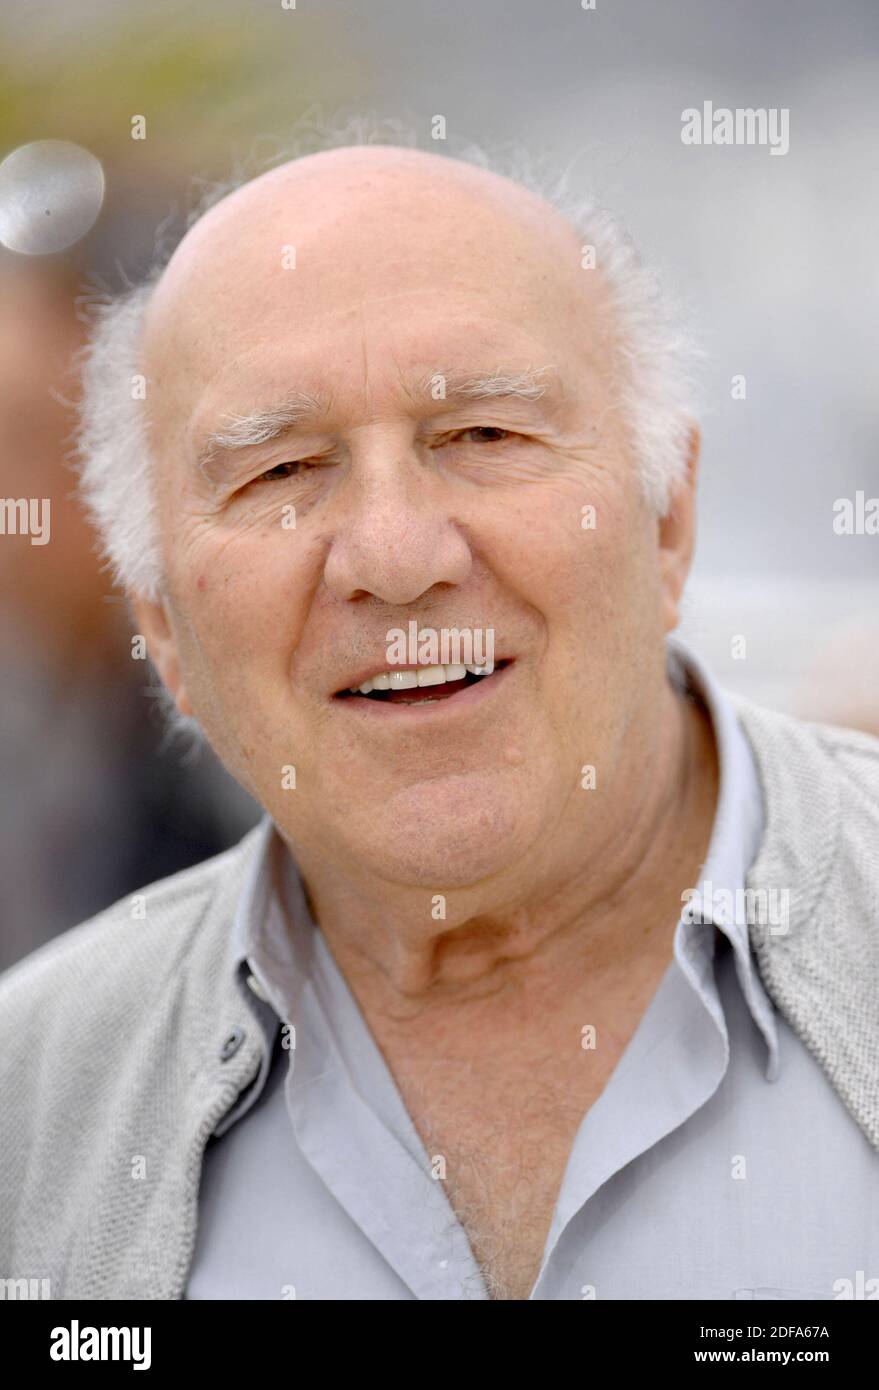 File photo dated May 16, 2007 of Michel Piccoli at the 60th Cannes International Film Festival, France. Michel Piccoli, one of the most original and versatile French actors of the last half century, has died aged 94, his family said Monday. An arthouse legend, Piccoli starred in a string of films by the Spanish-born great Luis Bunel, including “Belle de Jour” and “The Discreet Charm of the Bourgeoisie”, as well as turning in a typically memorable turn opposite Brigitte Bardot in Jean-Luc Godard’s 1963 classic “Contempt”. Photo by Hahn-Nebinger-Orban/ABACAPRESS.COM Stock Photo